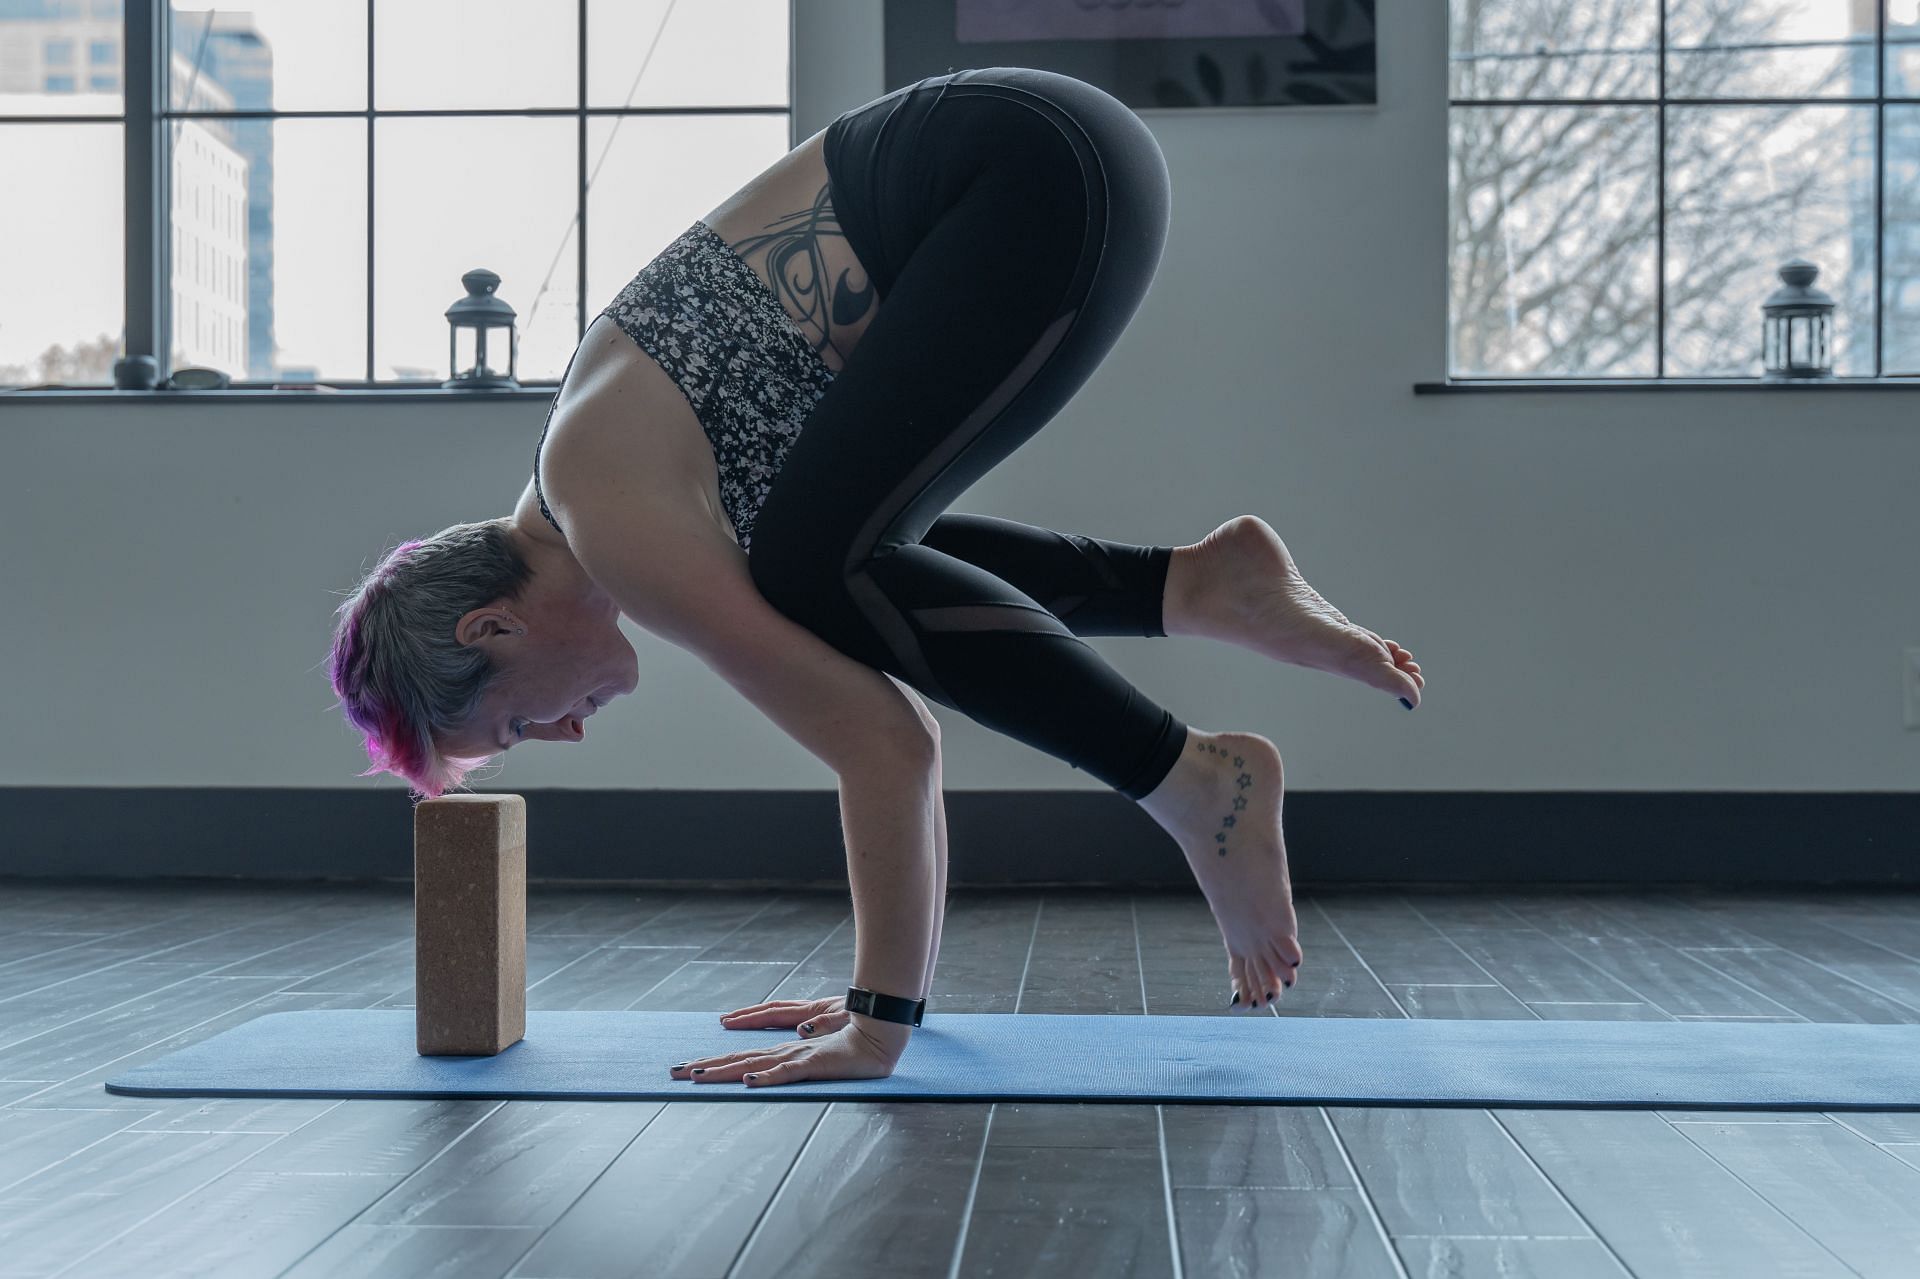 Firefly pose strengthens your abdomen and core. (Image via Pexels / Styves Exantus)